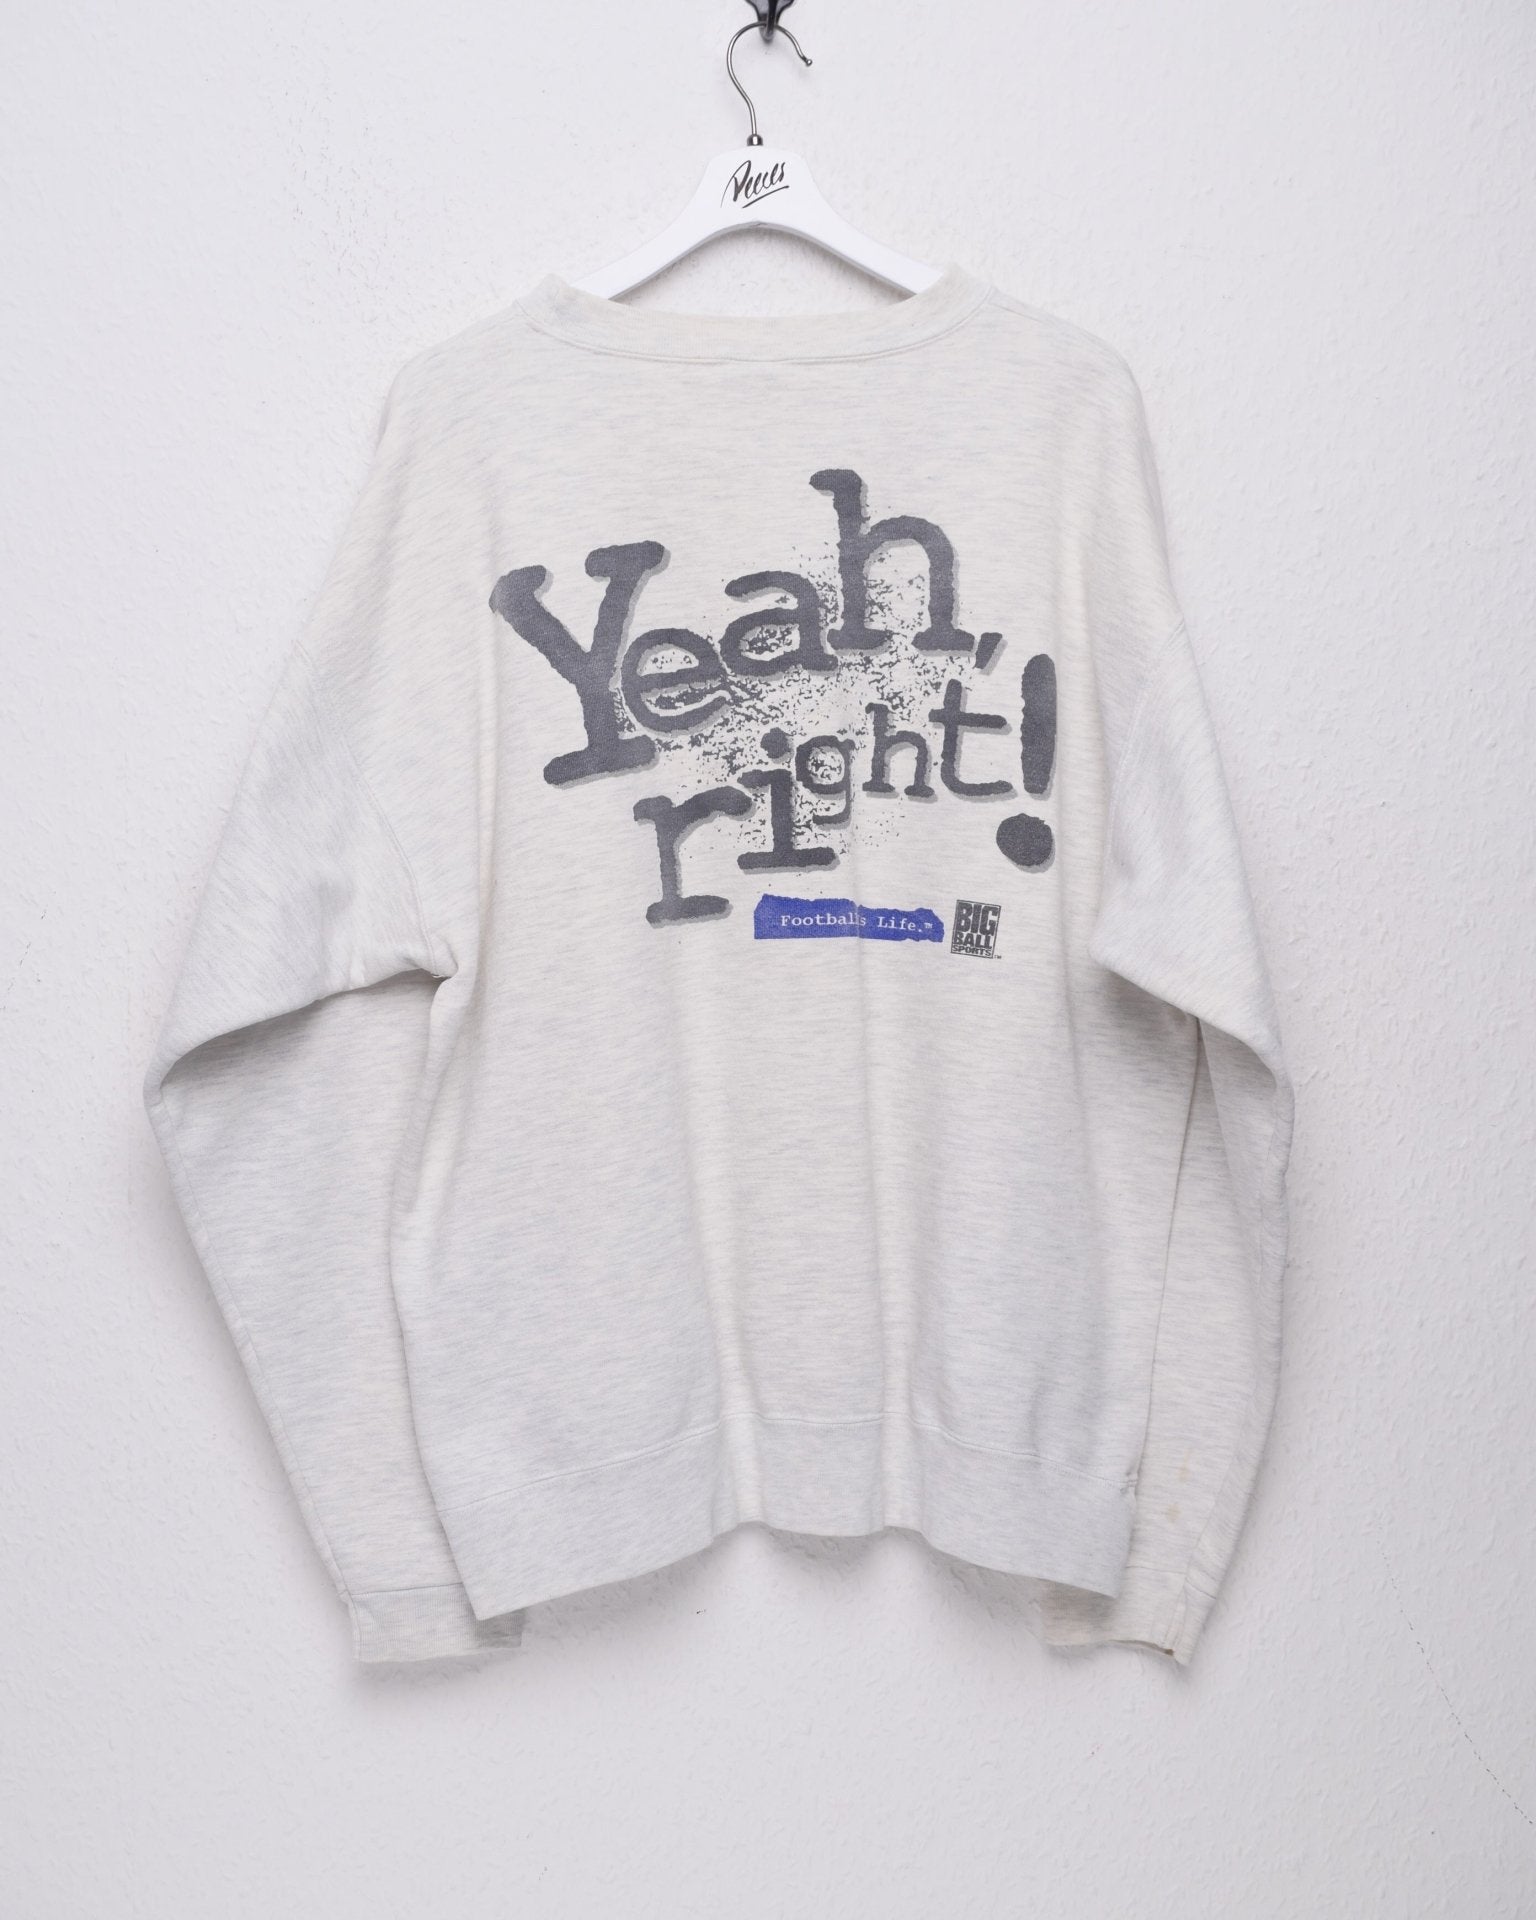 'It's just a Game' printed grey Sweater - Peeces